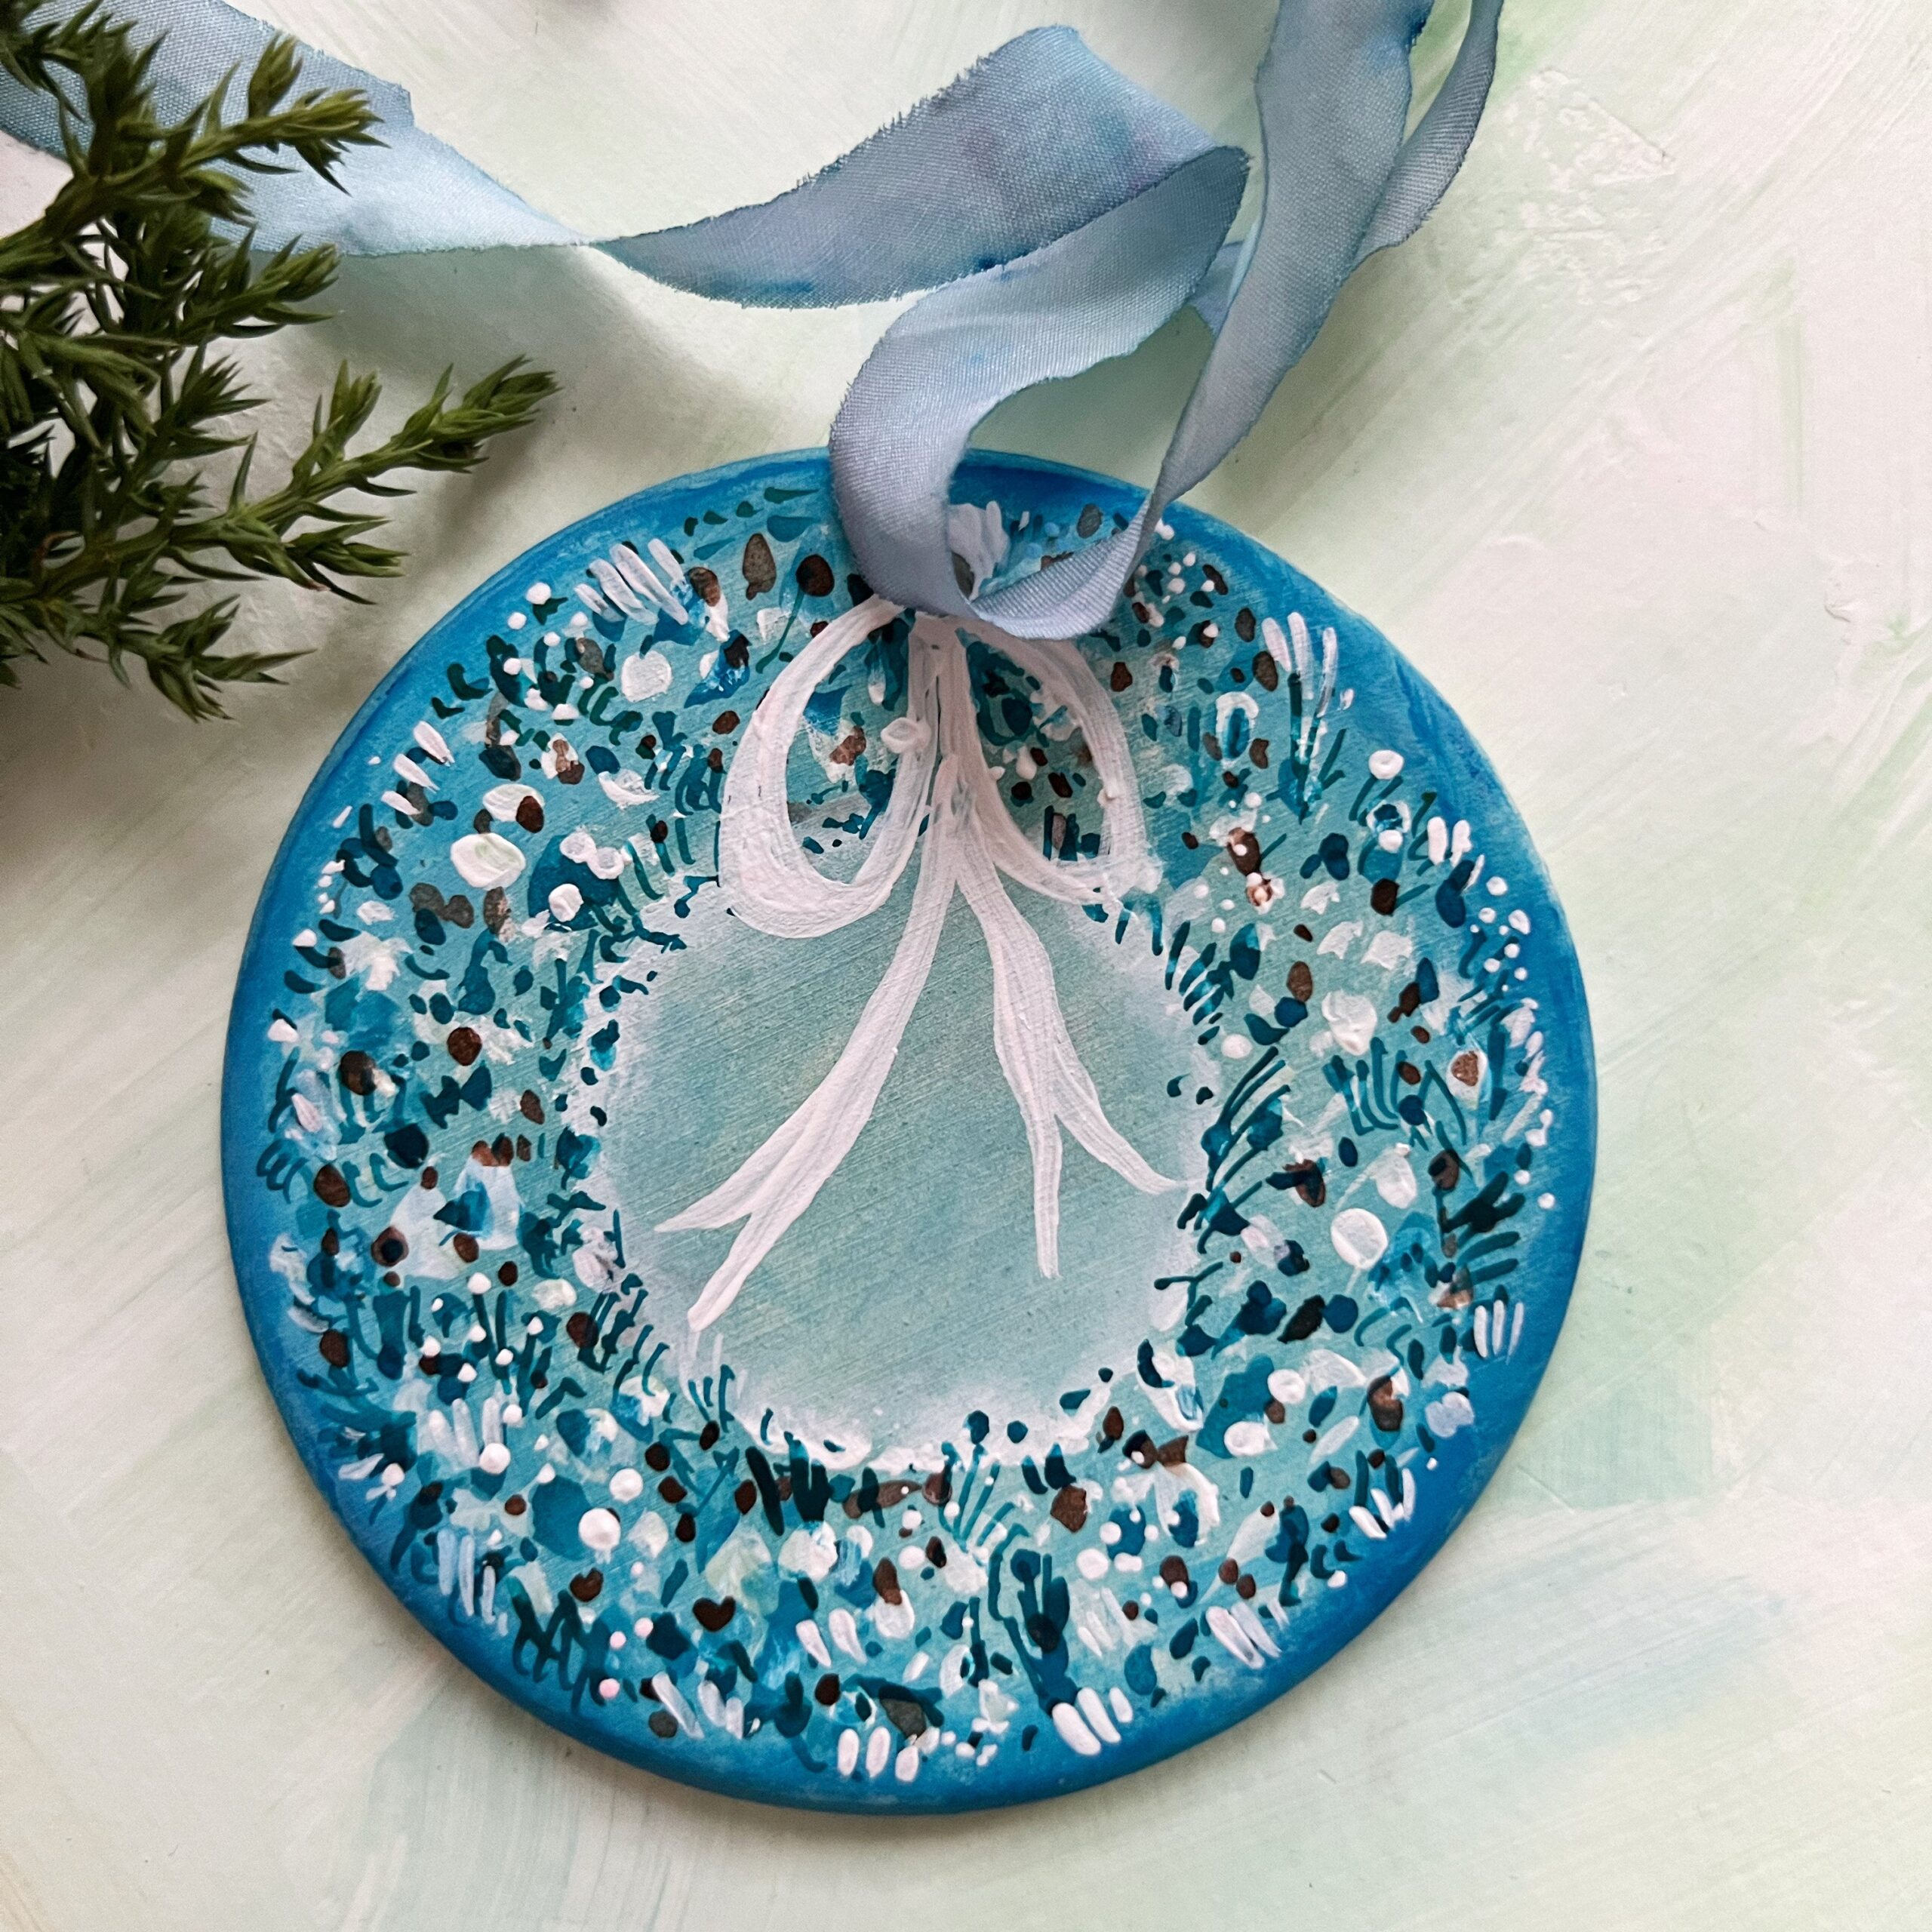 Hand Painted Ornaments 2022 – Delft-Ish